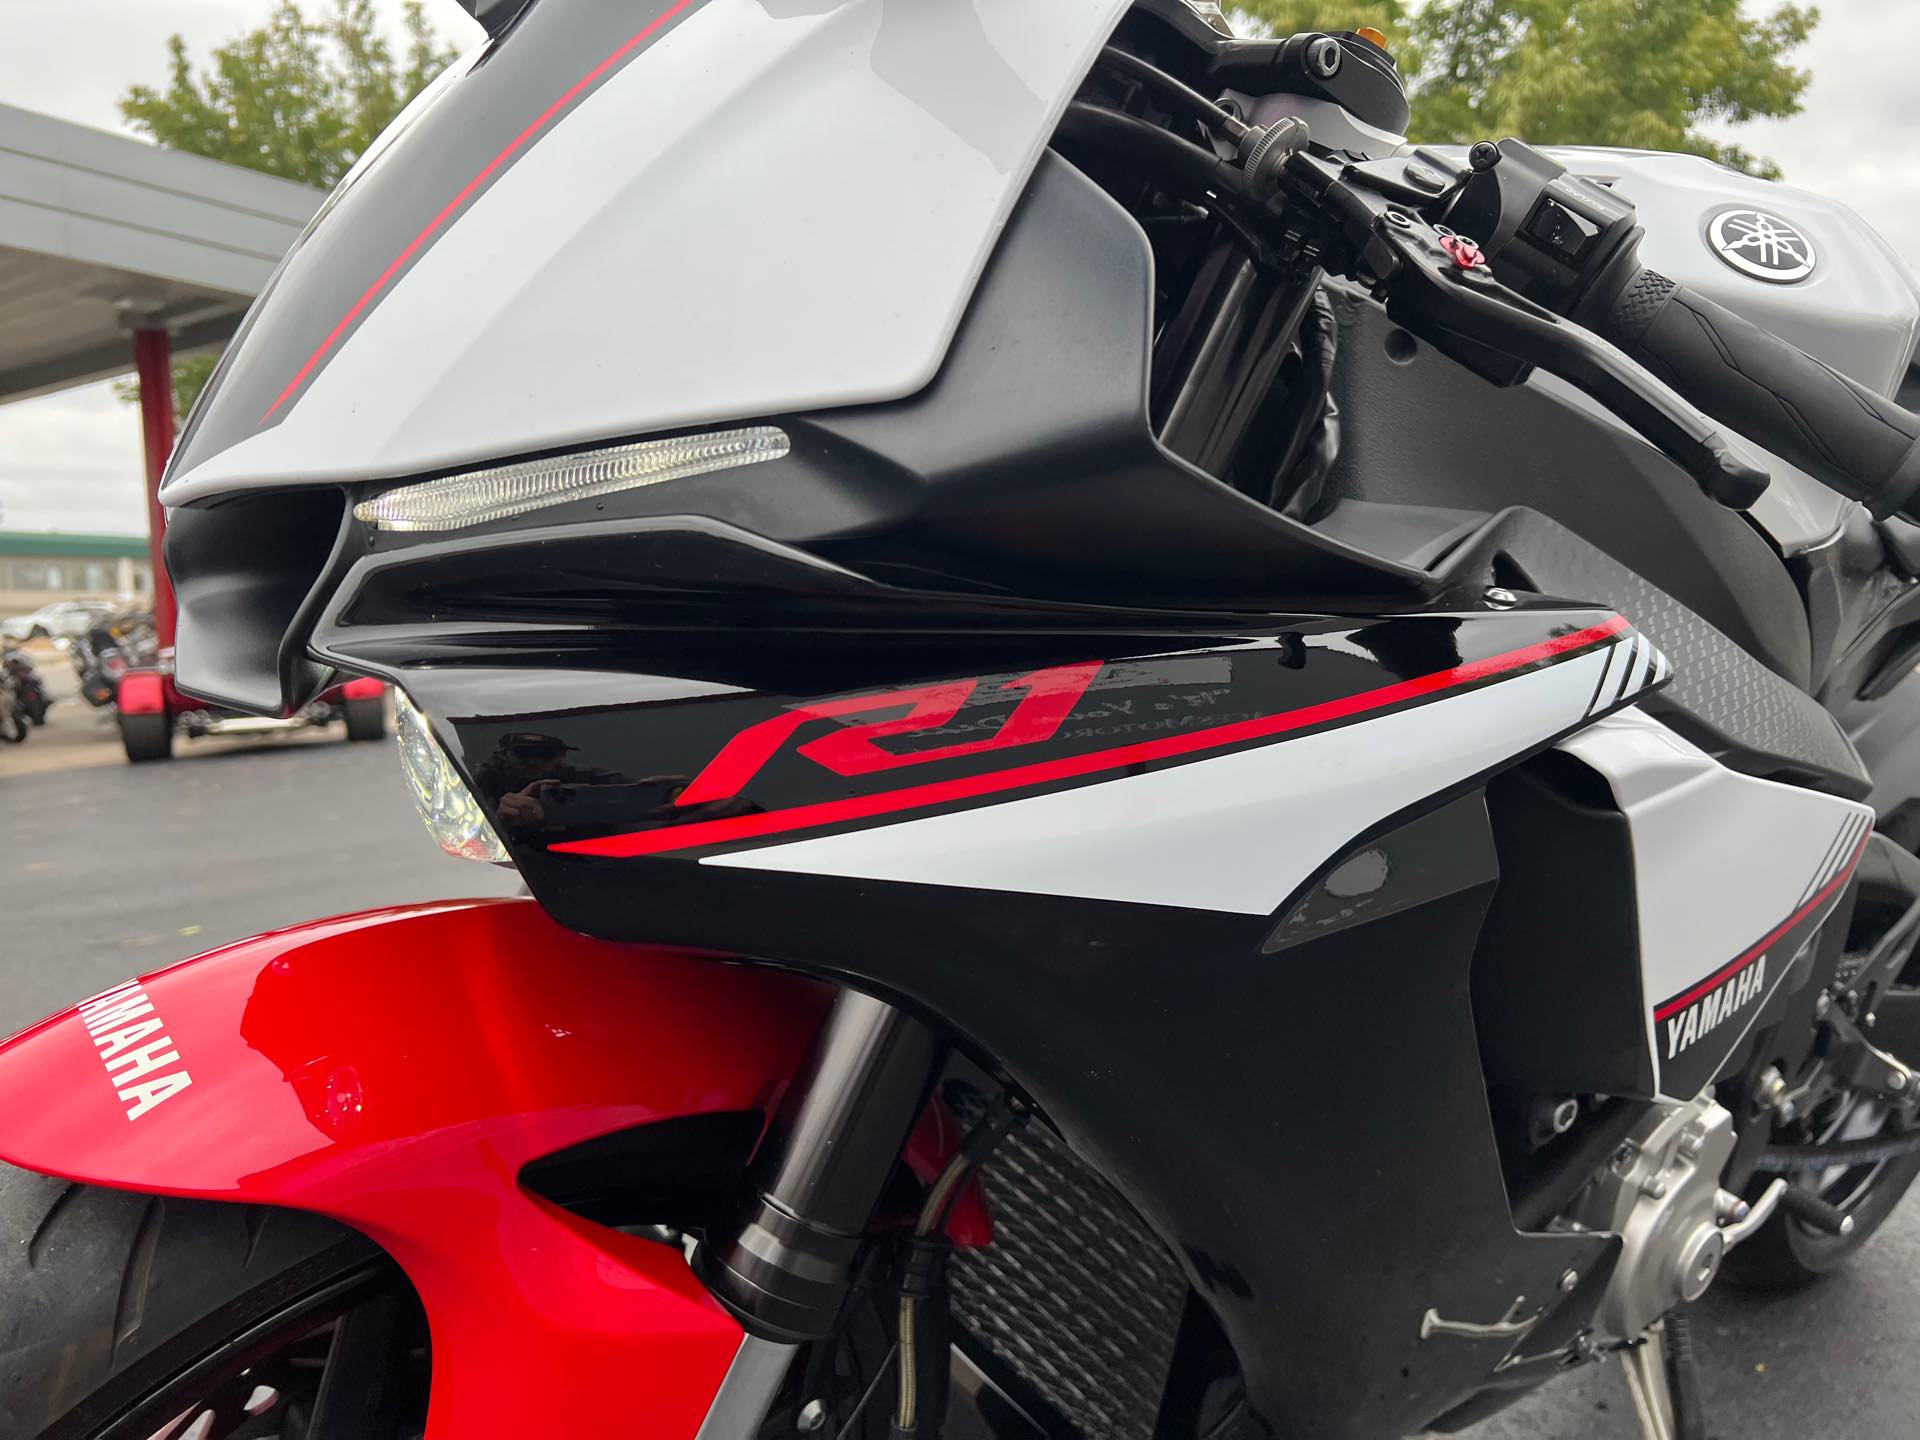 2016 Yamaha YZF R1S at Aces Motorcycles - Fort Collins